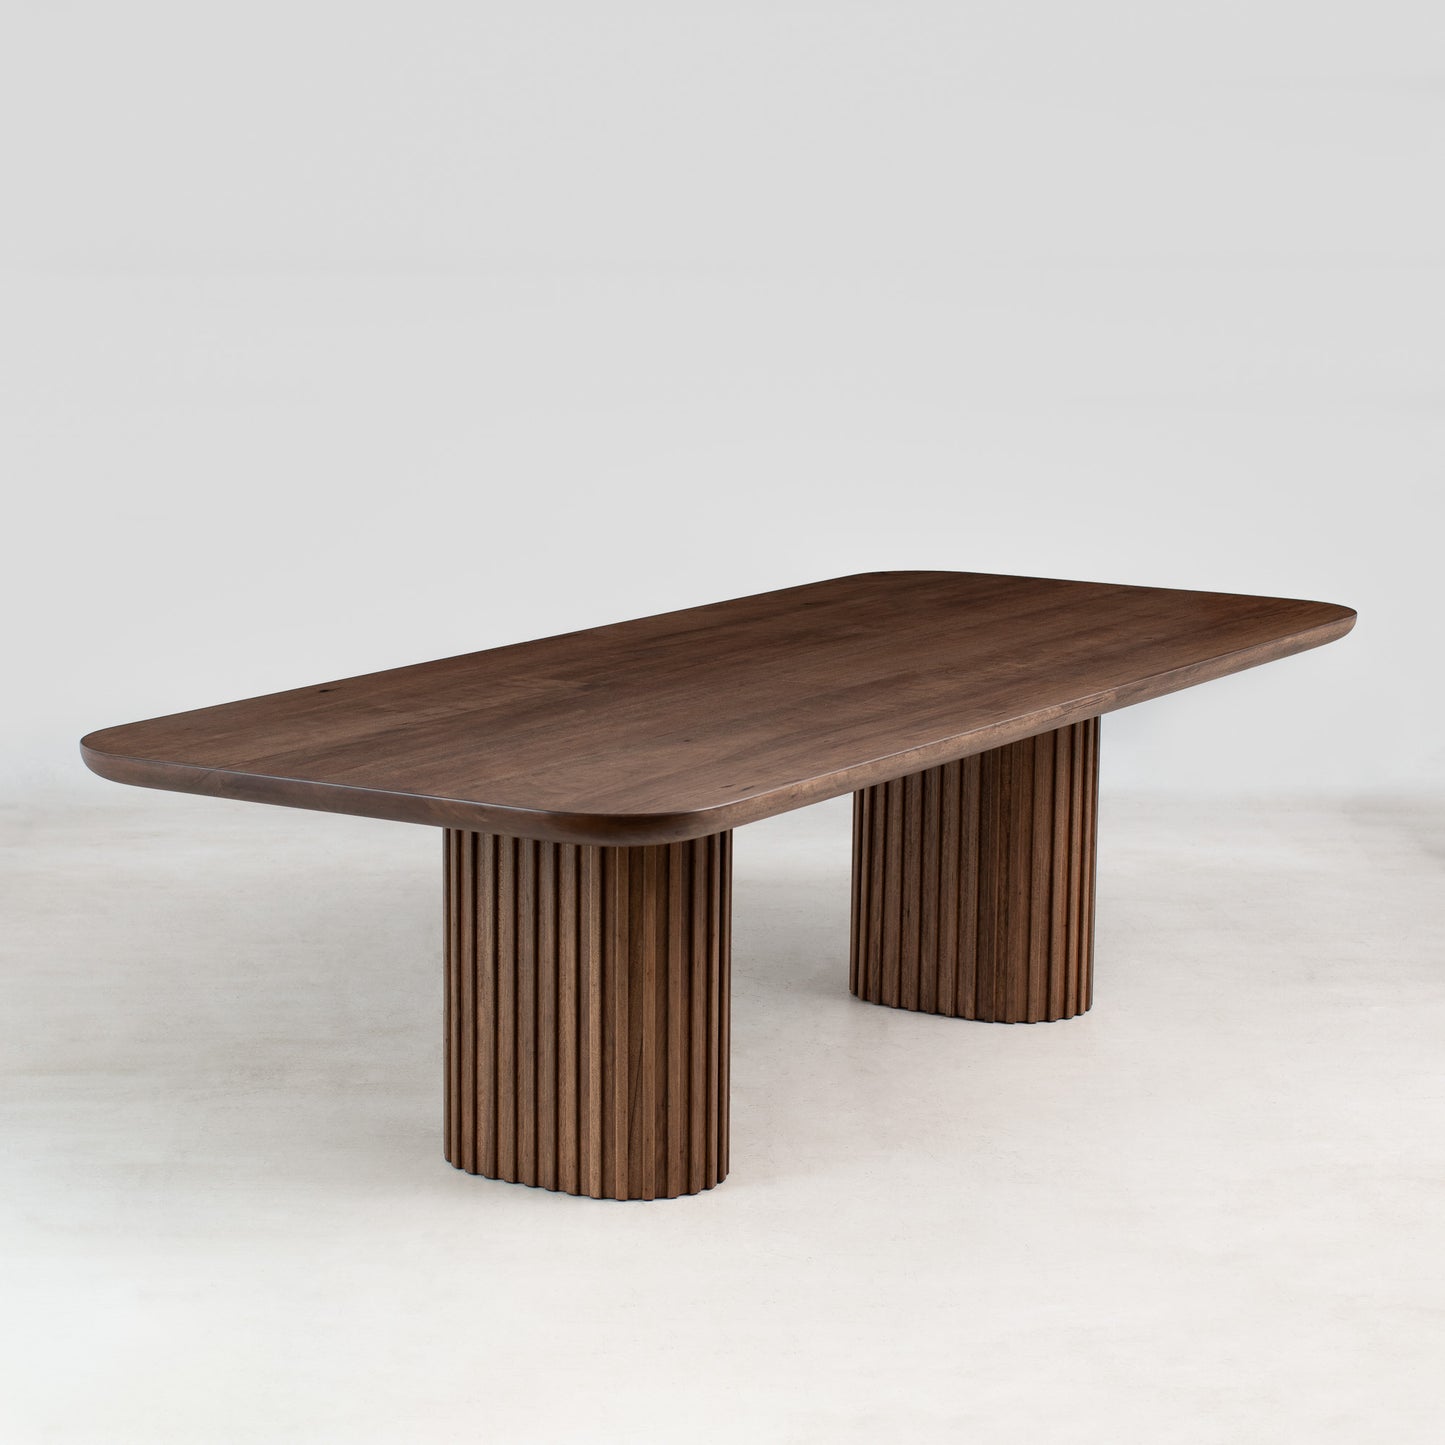 Malki Dining Table - DT571